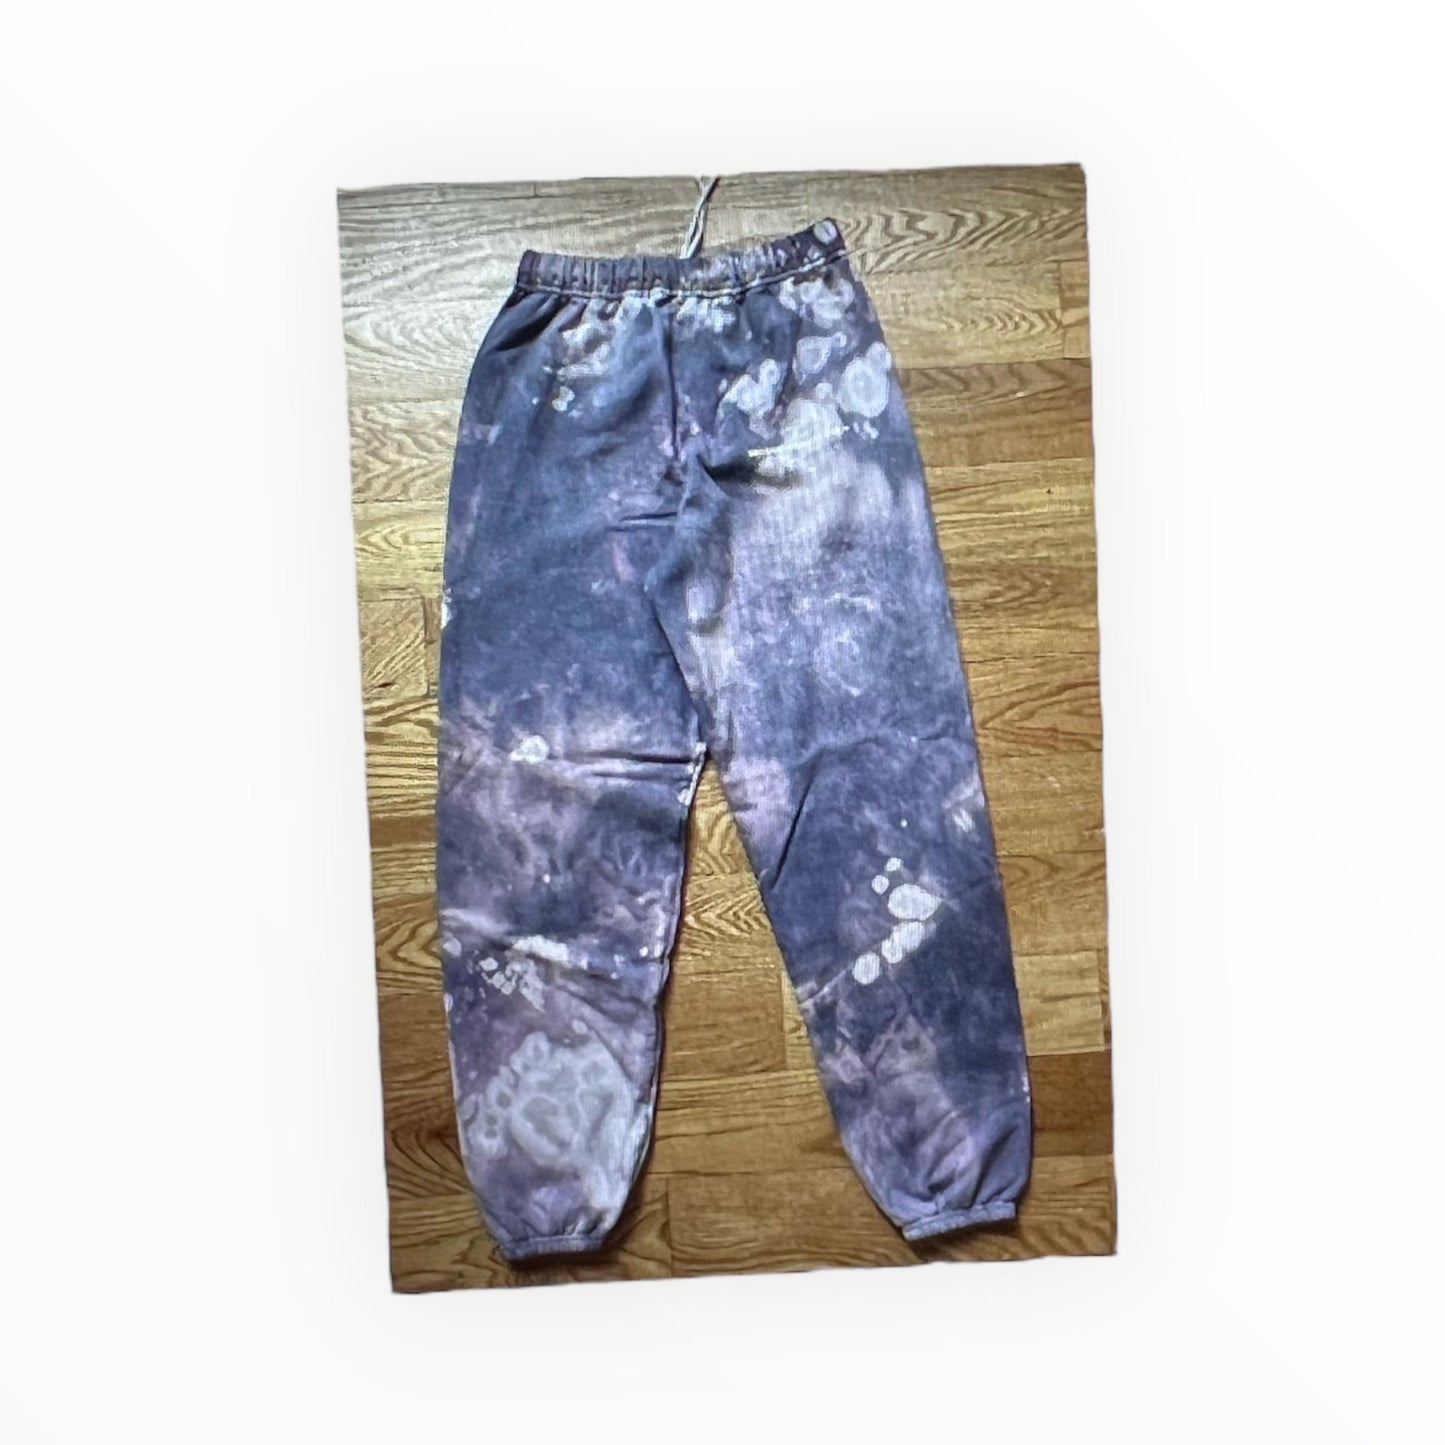 Unconditional Love Sweatpants (hand dye blue) - Something about Sofia